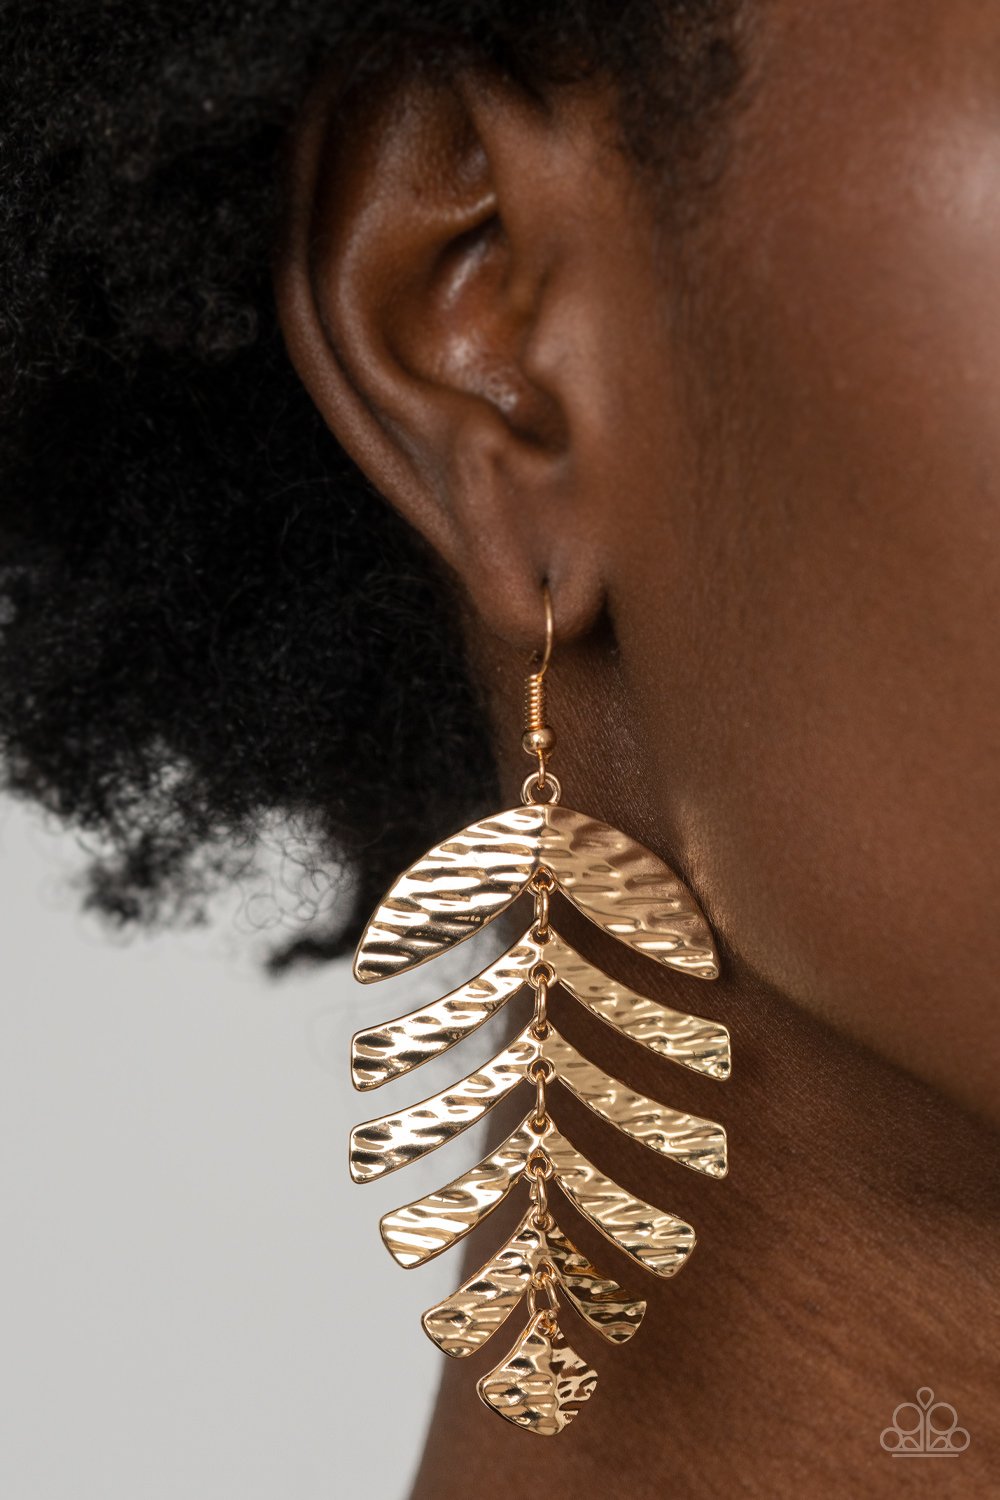 &lt;p&gt; Rippling with tactile textures, dainty gold frames link into a dancing palm leaf for a simply seasonal fashion. Earring attaches to a standard fishhook fitting.&lt;/p&gt;  
 

 &lt;p&gt; &lt;i&gt; Sold as one pair of earrings. &lt;/i&gt; &lt;/p&gt;
 

&lt;h5&gt;Paparazzi Accessories • $5 Jewelry&lt;/h5&gt;